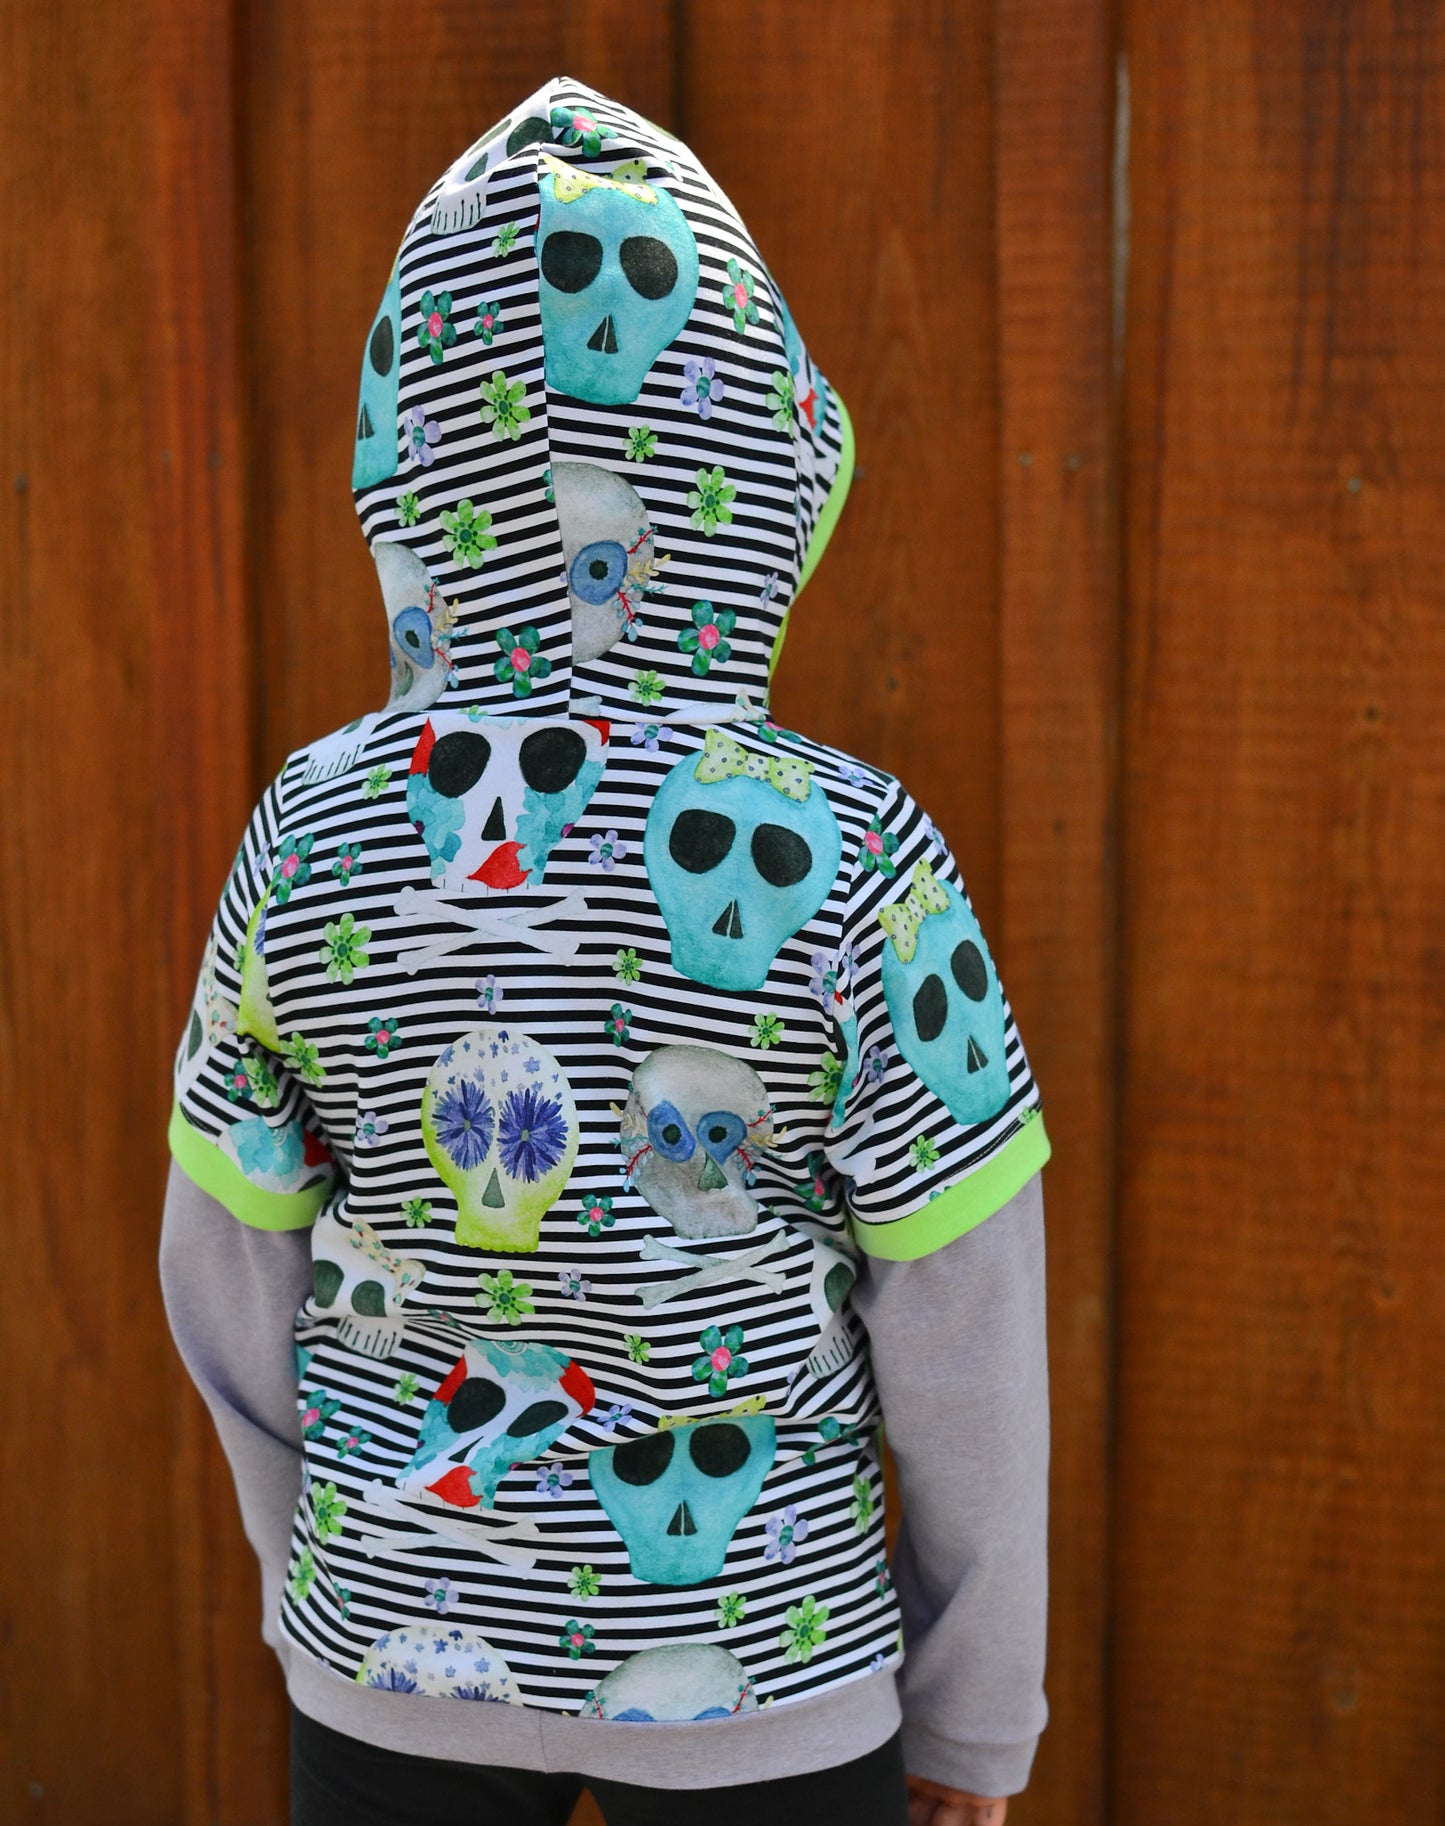 Kids Candy Pocket Tee - Multiple options available - Digital PDF Sewing Pattern